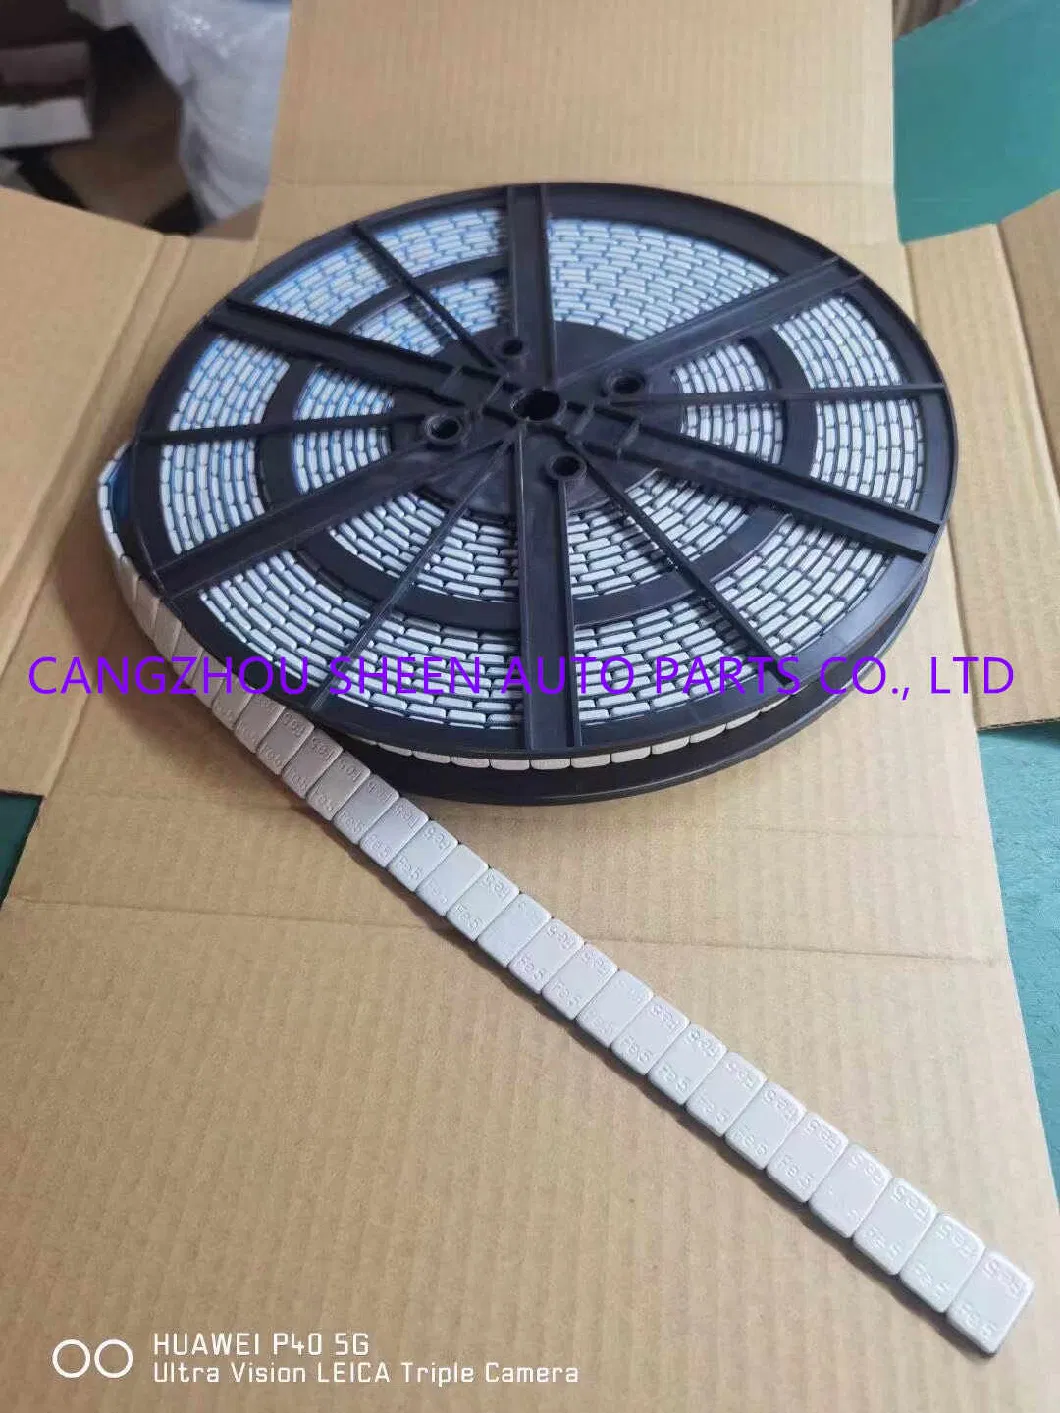 Factory Supply Fe Stick on/Adhesive Zinc/Epoxy Coated Wheel Balancing Weights in Roll